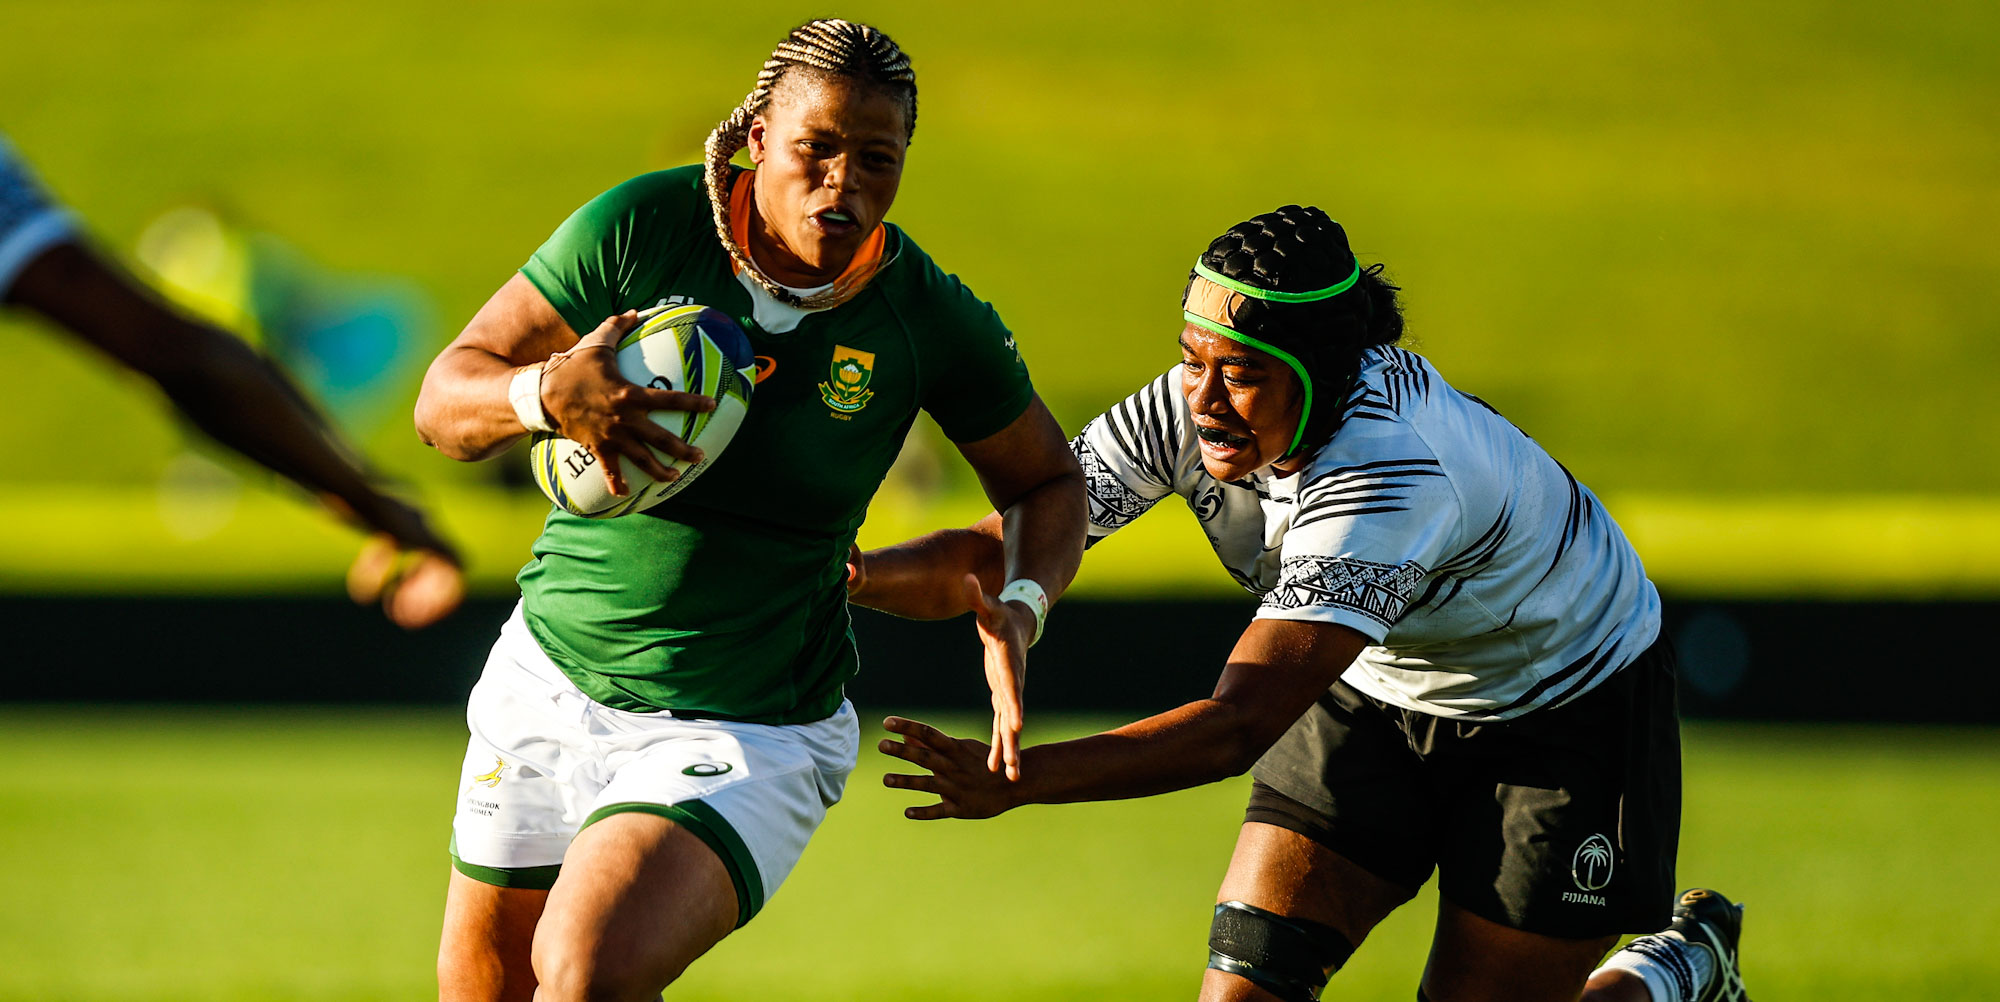 Aseza Hele was superb on the attack for the Springbok Women.